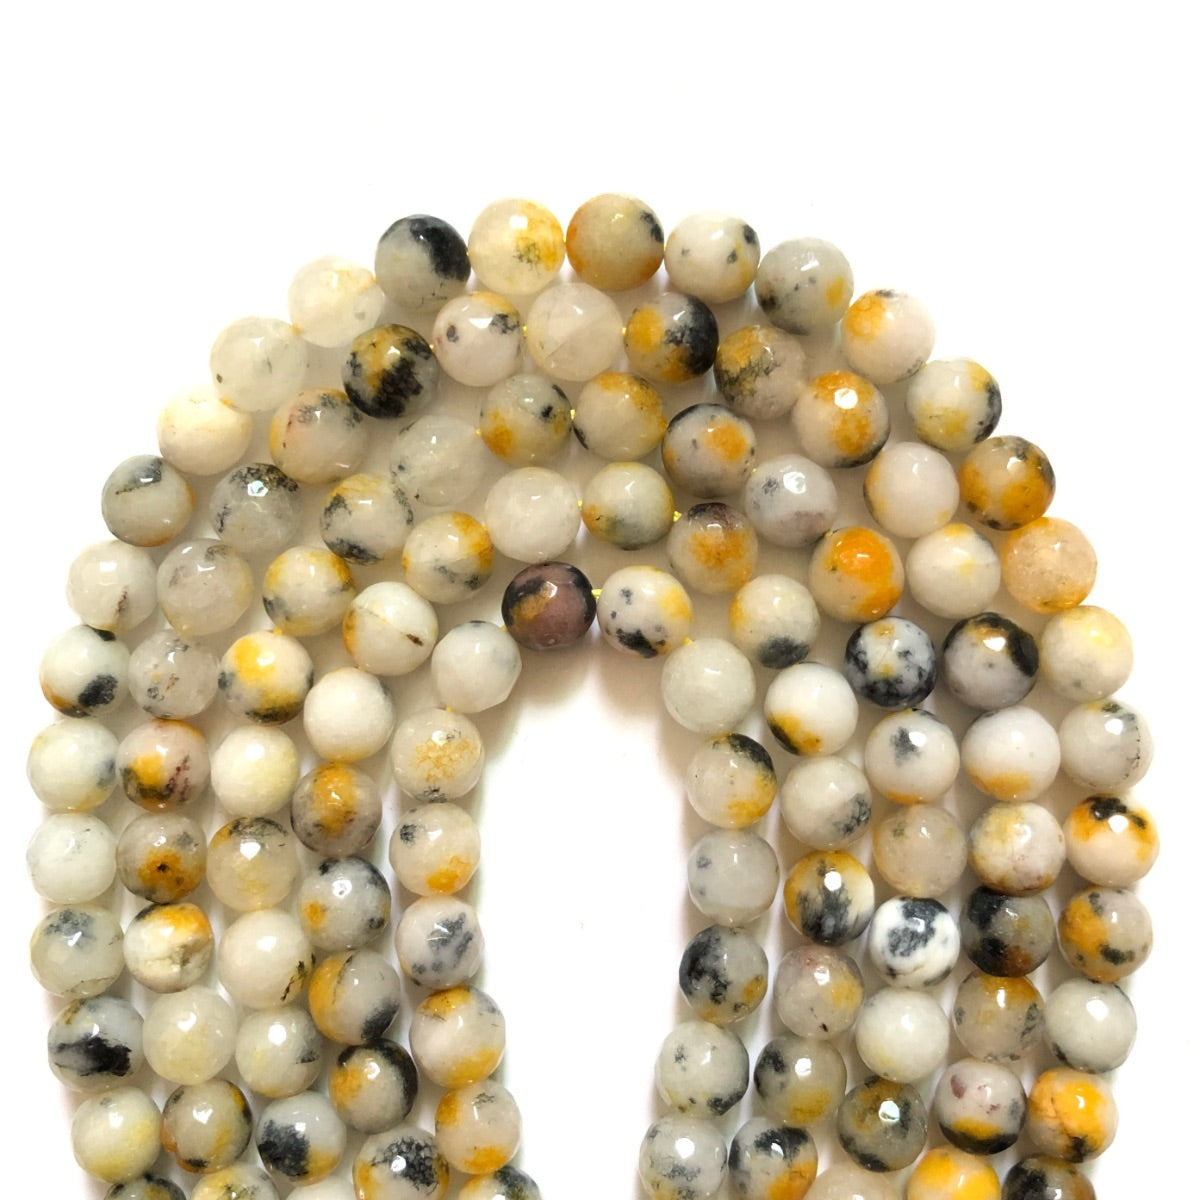 2 Strands/lot 10mm White Yellow Black Faceted Jade Stone Beads Stone Beads Faceted Jade Beads New Beads Arrivals Charms Beads Beyond